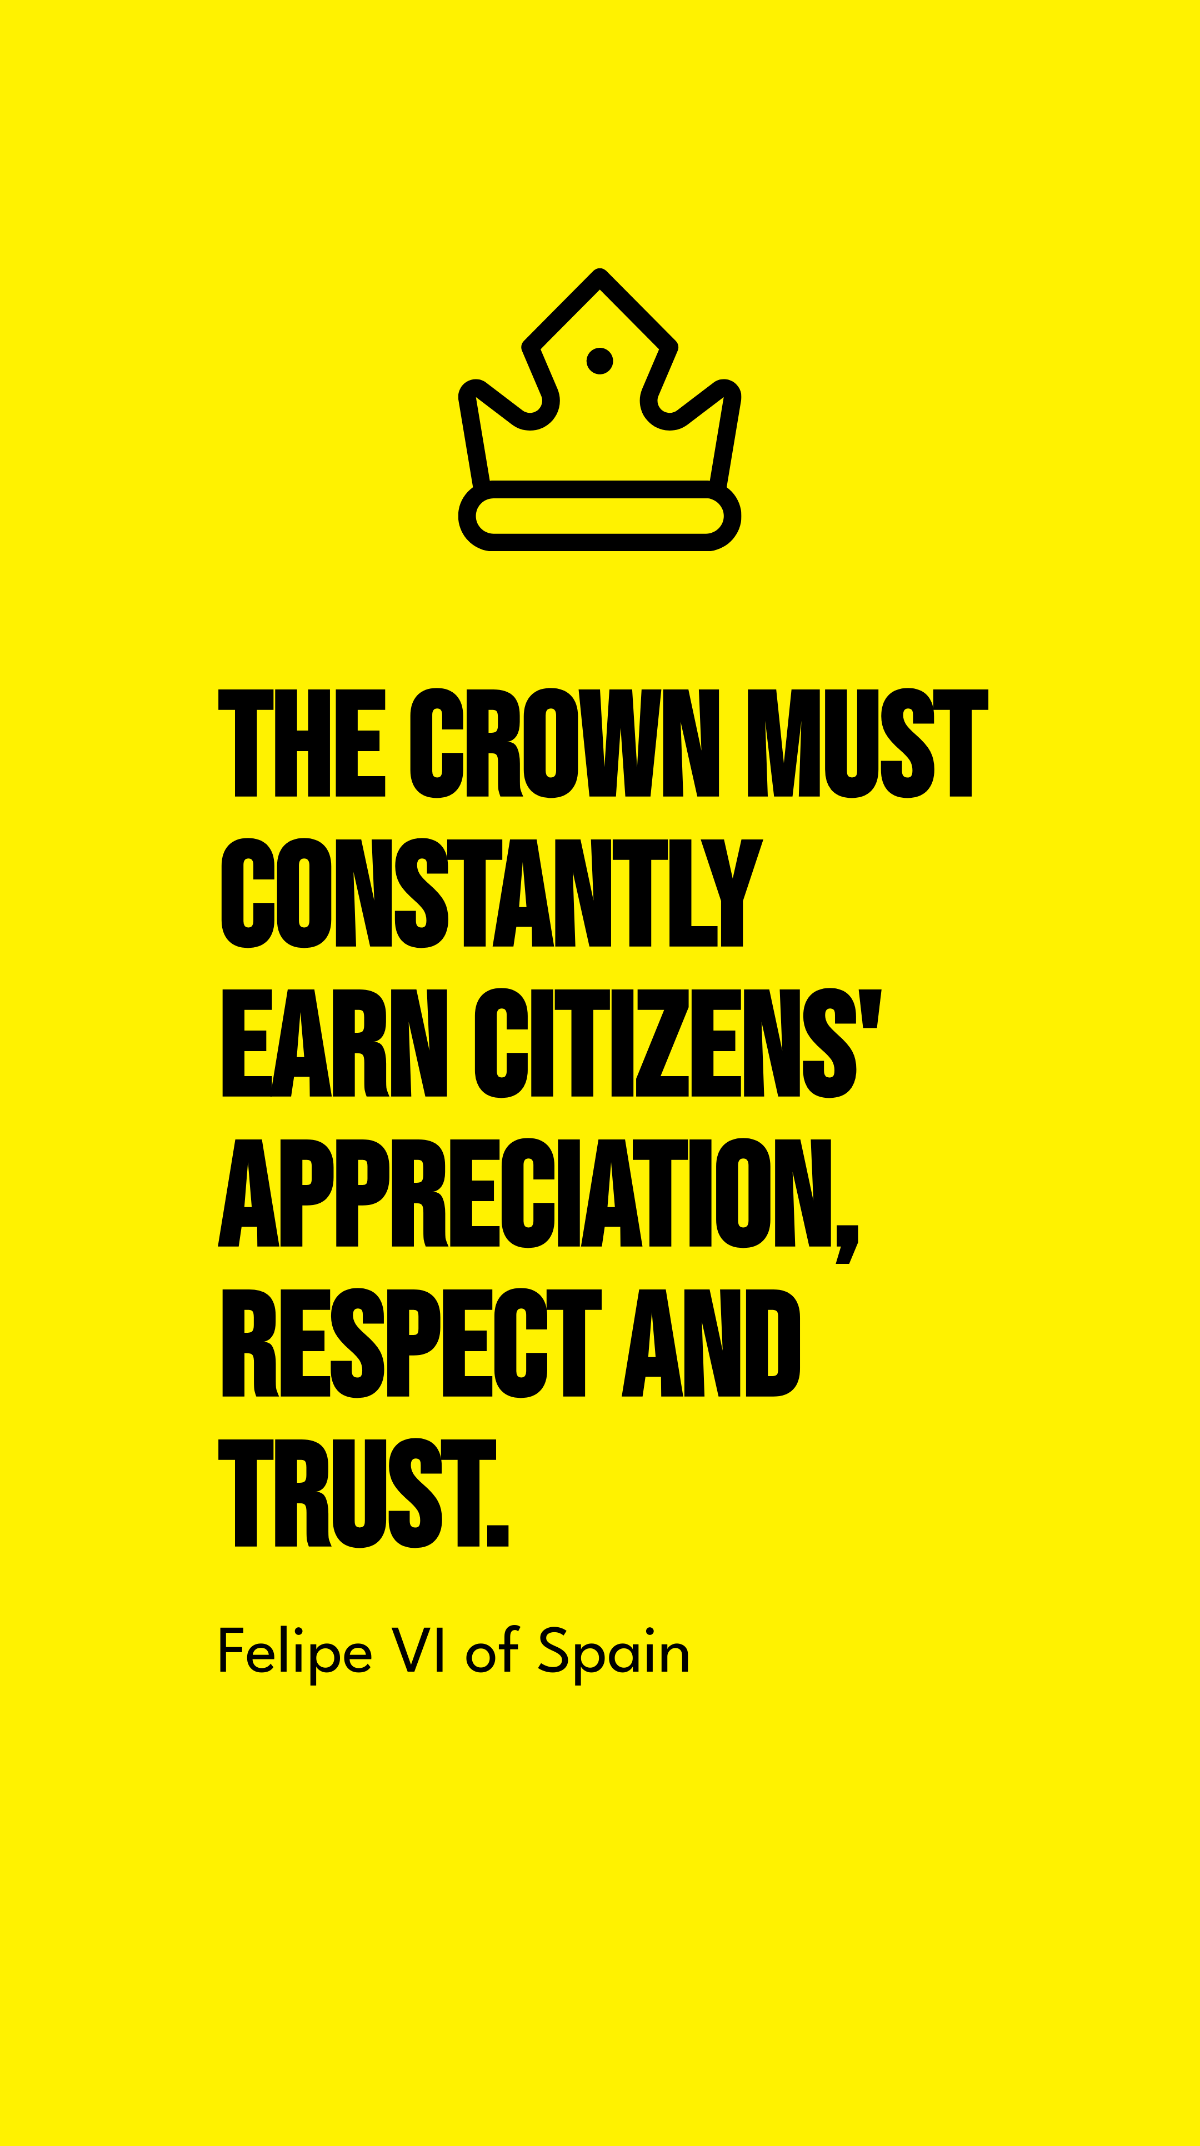 Felipe VI of Spain - The crown must constantly earn citizens' appreciation, respect and trust. Template